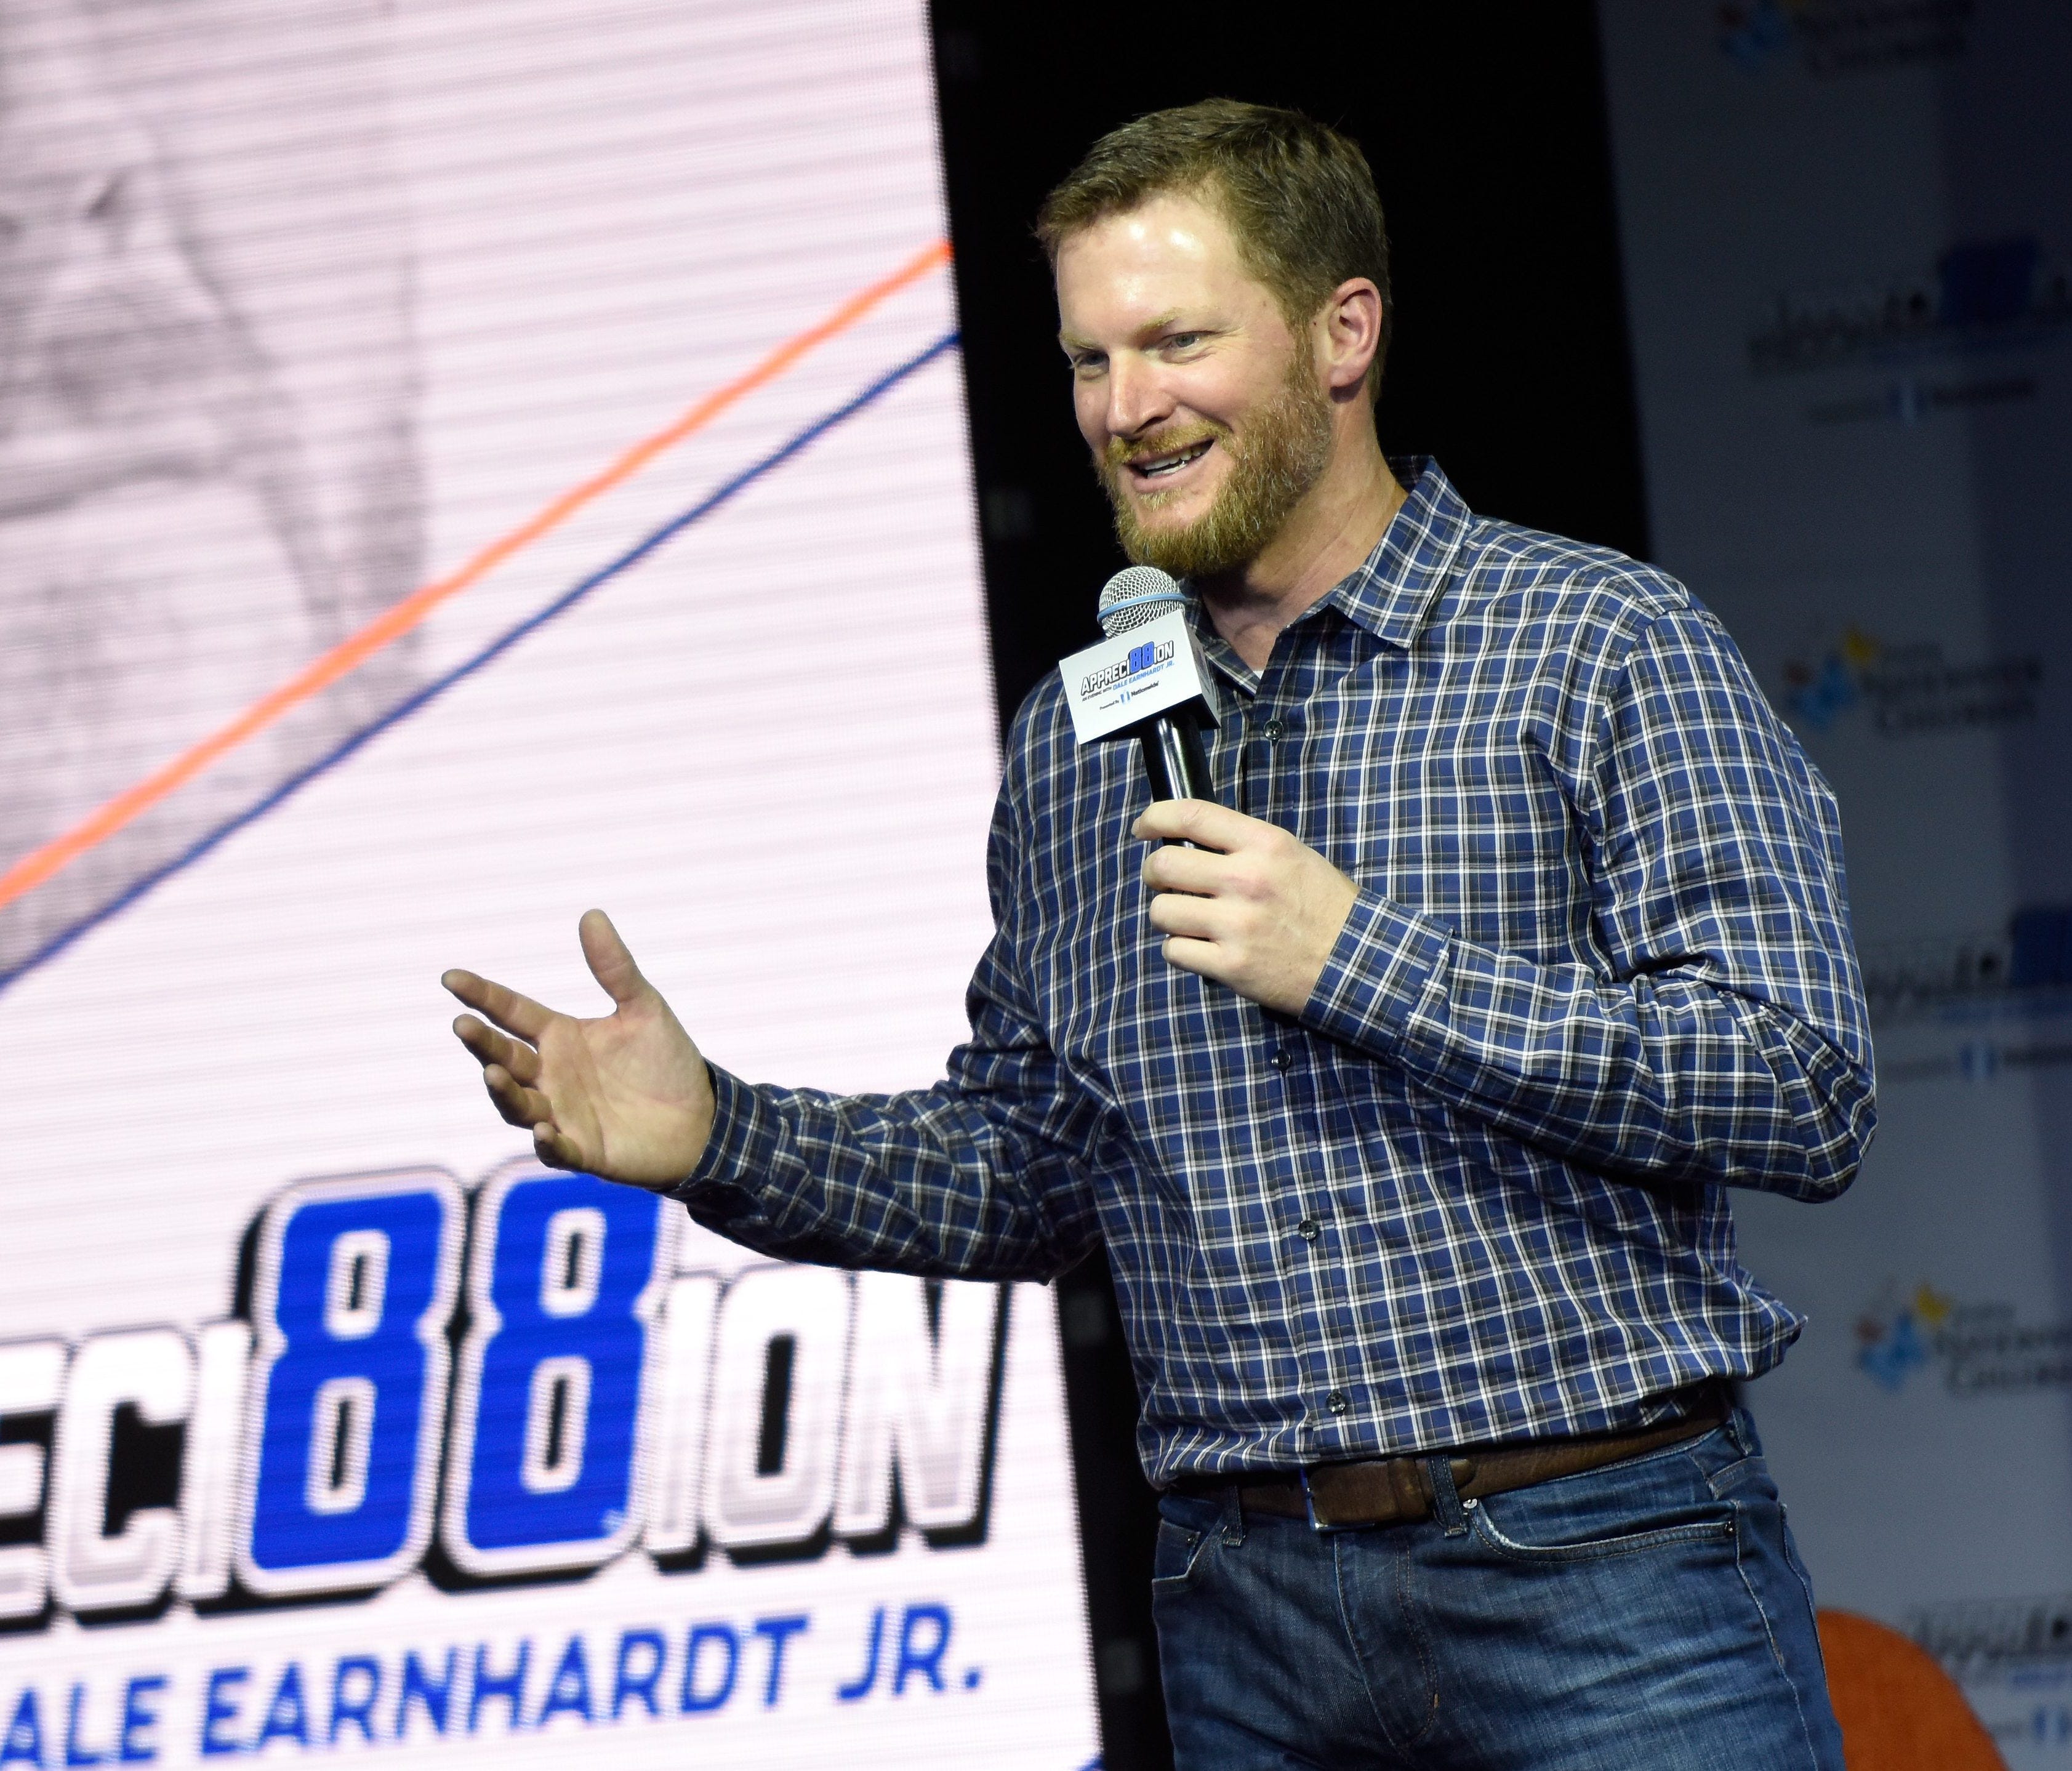 LAS VEGAS, NV - NOVEMBER 28:  Dale Earnhardt Jr. talks on stage during Appreci88ion, An Evening With Dale Earnhardt Jr. Presented By Nationwide at The Cosmopolitan of Las Vegas on November 28, 2017 in Las Vegas, Nevada.  (Photo by Jared C. Tilton/Get